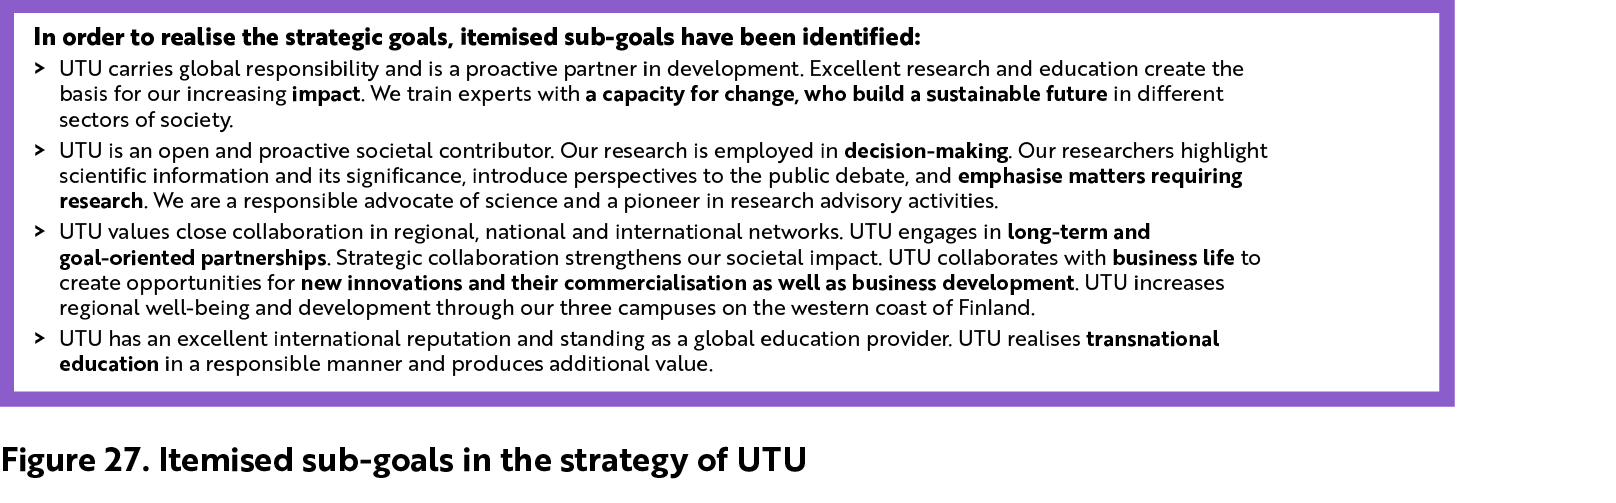 In order to realise the strategic goals, itemised sub-goals have been identified. UTU carries global responsibility and is a proactive partner in development. Excellent research and education create the basis for our increasing impact. We train experts with a capacity for change, who build a sustainable future in different sectors of society. UTU is an open and proactive societal contributor. Our research is employed in decision-making. Our researchers highlight scientific information and its significance, introduce perspectives to the public debate, and emphasise matters requiring research. We are a responsible advocate of science and a pioneer in research advisory activities. UTU values close coll¬aboration in regional, national and international networks. UTU engages in long-term and goal-oriented partnerships. Strategic col¬laboration strengthens our societal impact. UTU col¬laborates with business life to create opportunities for new innovations and their commercialisation as well as business development. UTU increases regional well-being and development through our three campuses on the western coast of Fin-land. UTU has an excellent international reputation and standing as a global education provider. UTU realises transnational  education in a responsible manner and produces additional value.